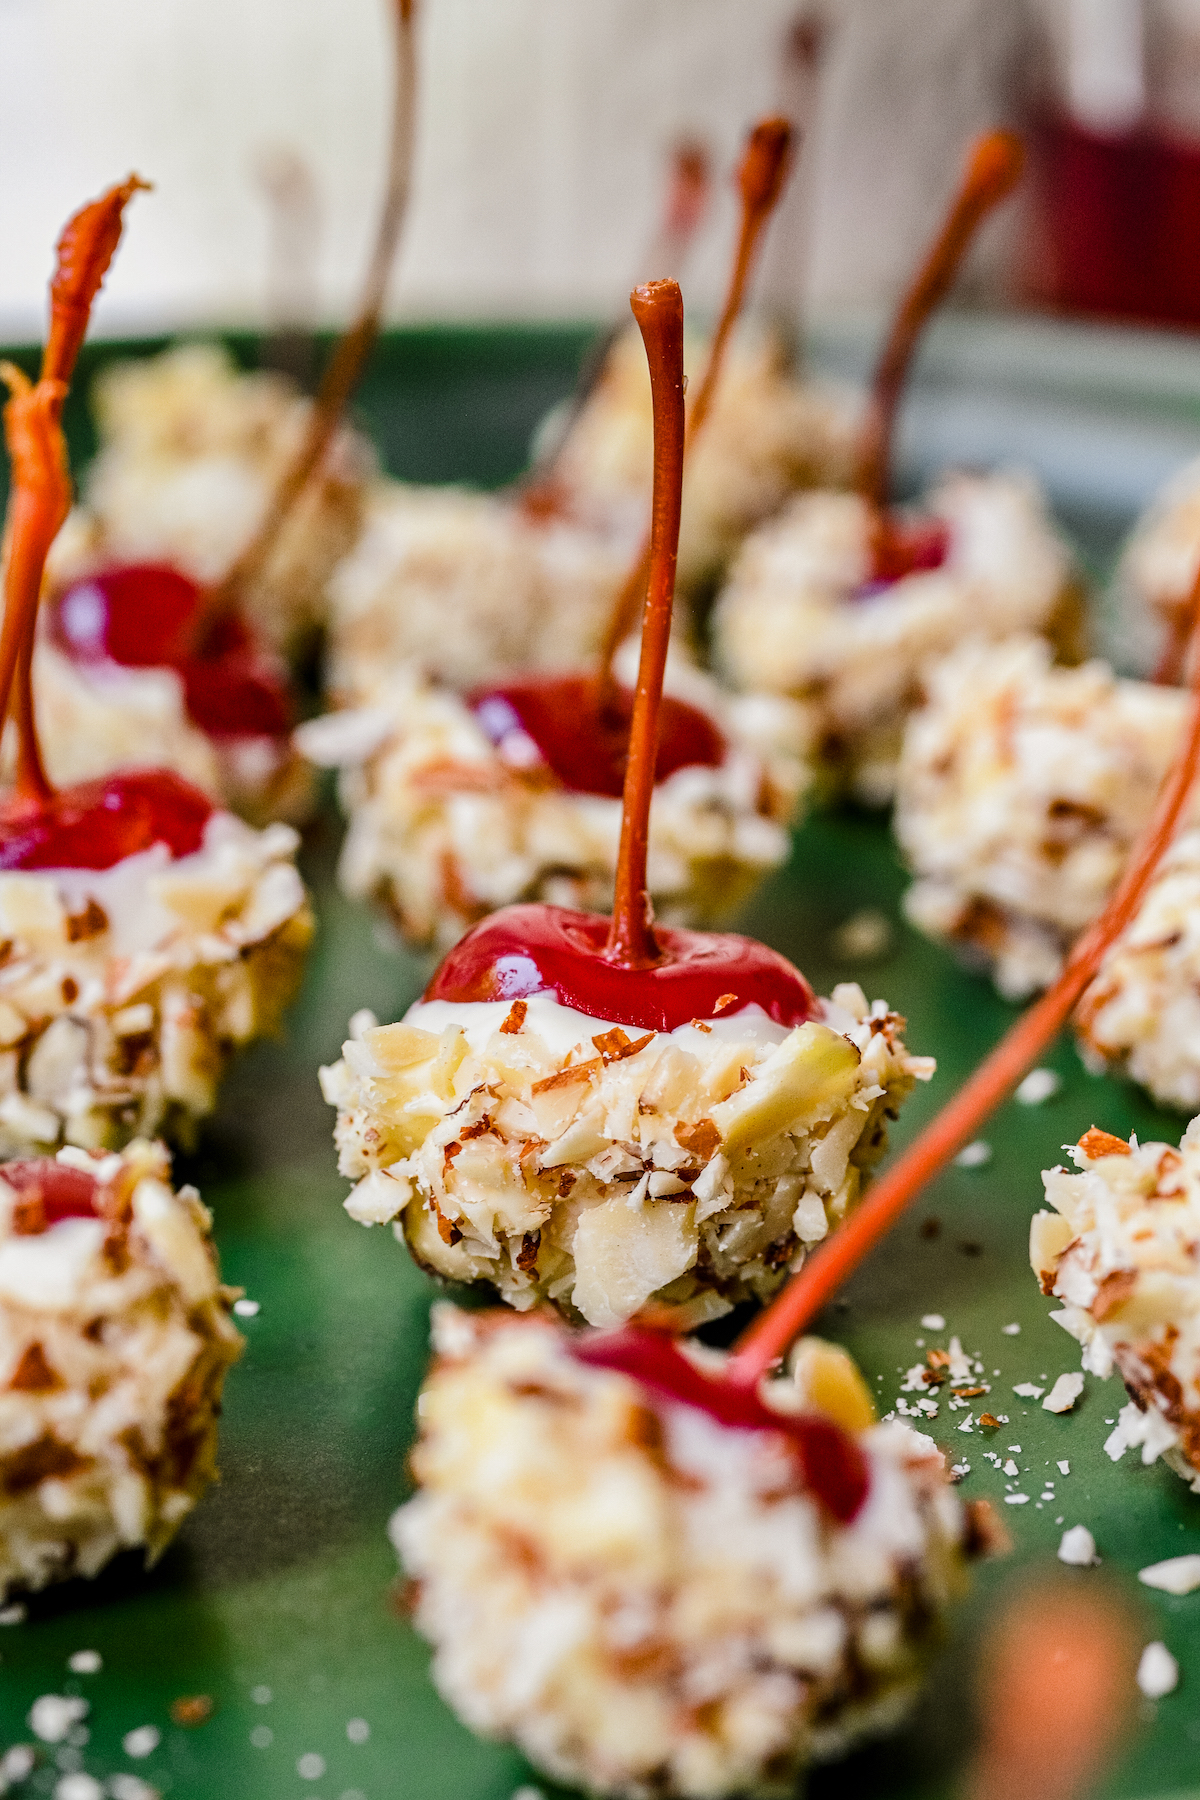 White-chocolate coated cherries lined up on a green serving plate.